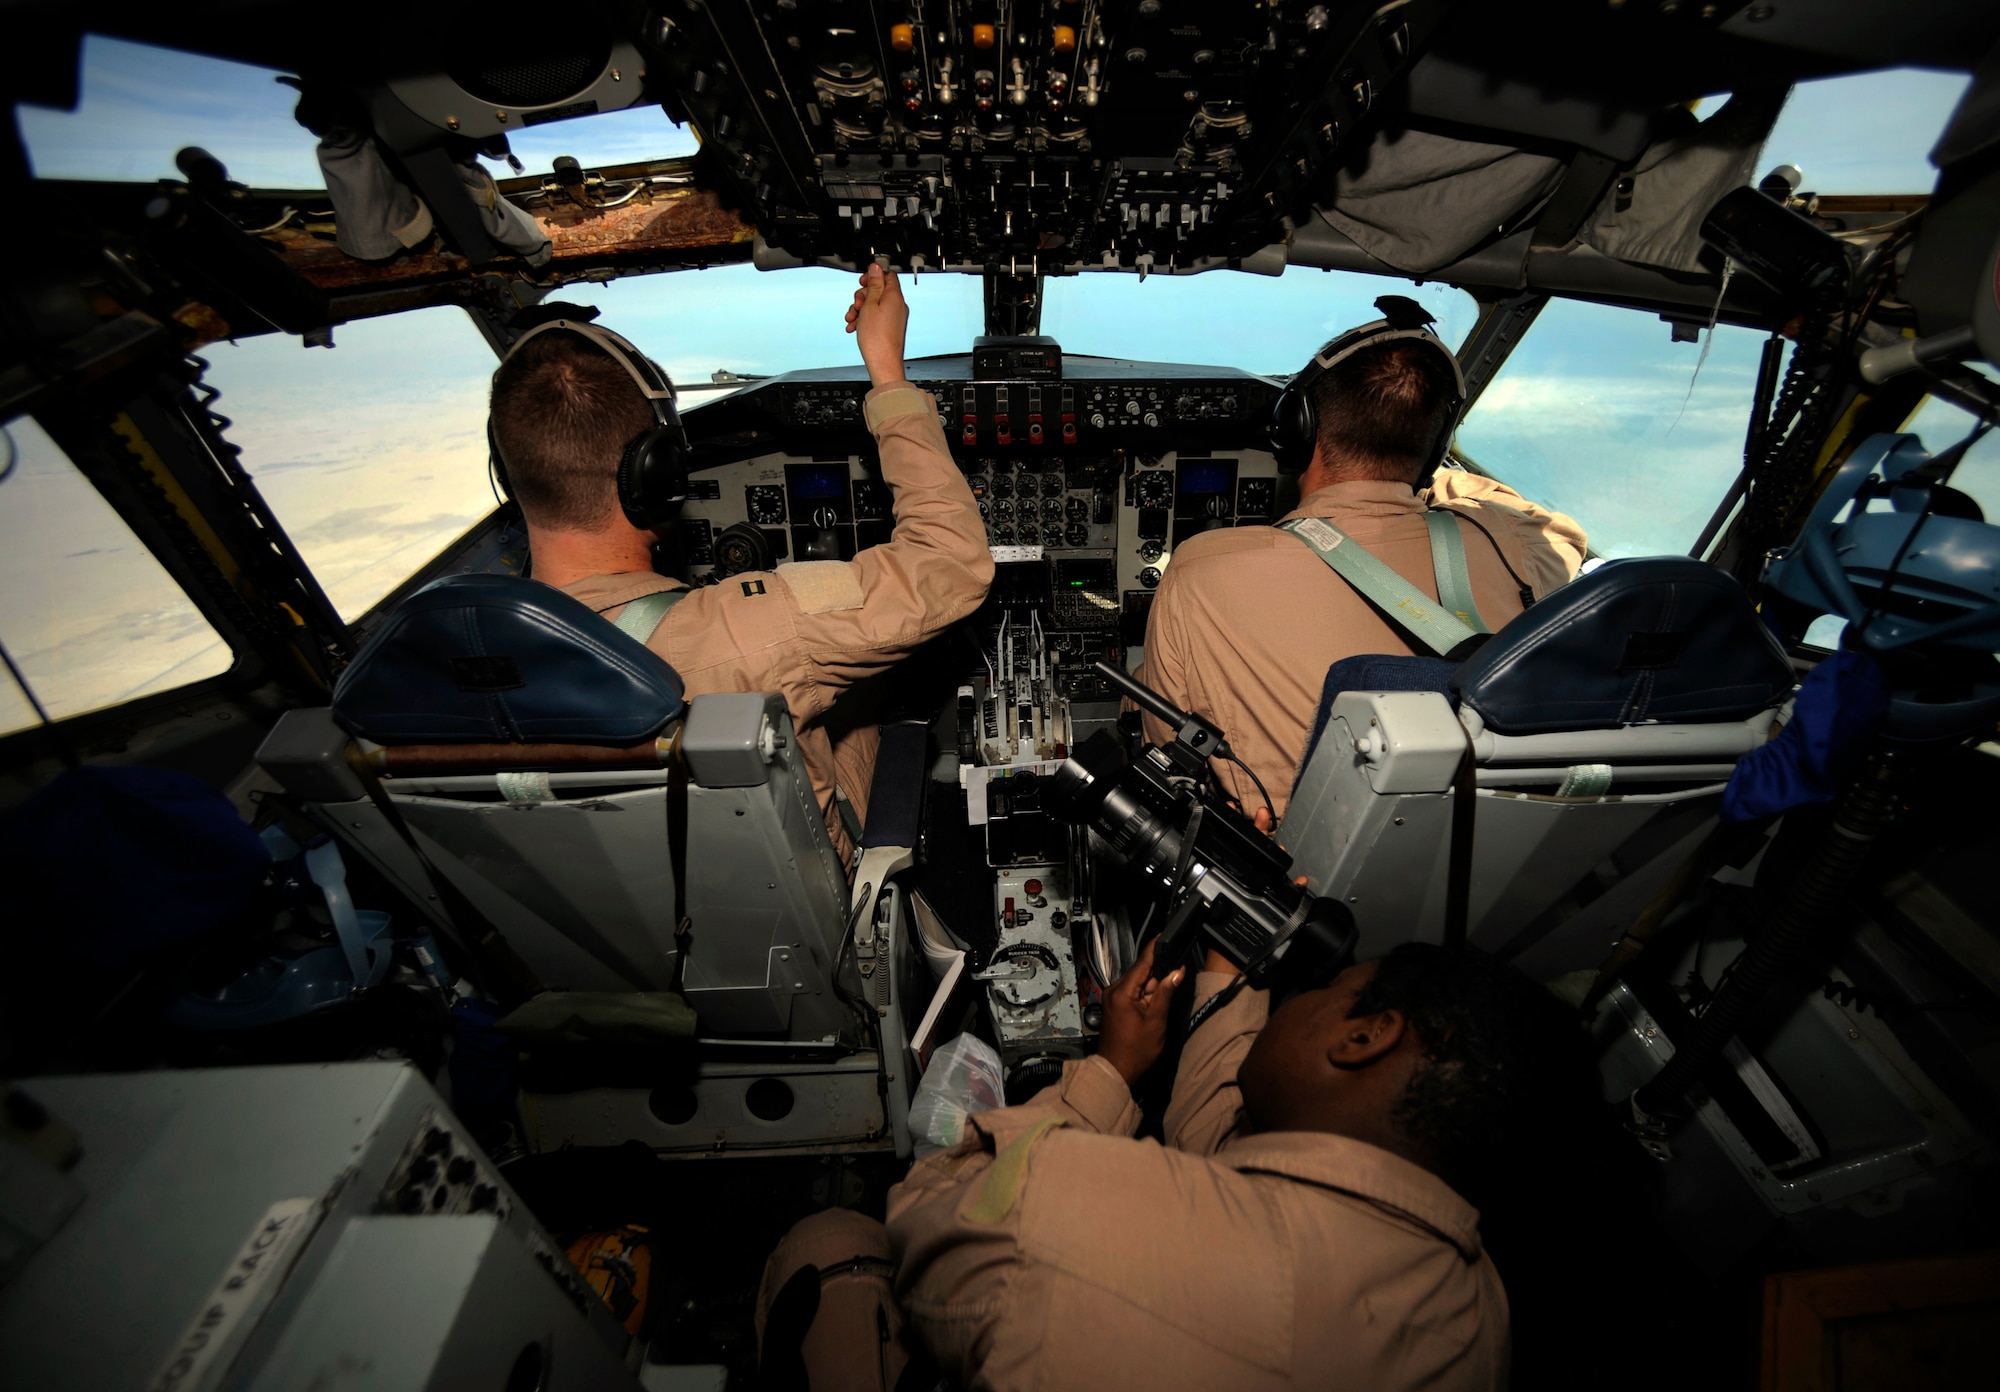 Capt. Micah Vander Veen (left) and 1st Lt. Jake Houston, assigned to the 340th Expeditionary Air Refueling Squadron at an air base in Southwest Asia, fly a KC-135 Stratotanker on an air refueling mission in support of Operation Iraqi Freedom. They are being filmed by Staff Sgt. Chalanda Roberts from the 1st Combat Camera Squadron.  (U.S. Air Force photo/Staff Sgt. James L. Harper Jr.)